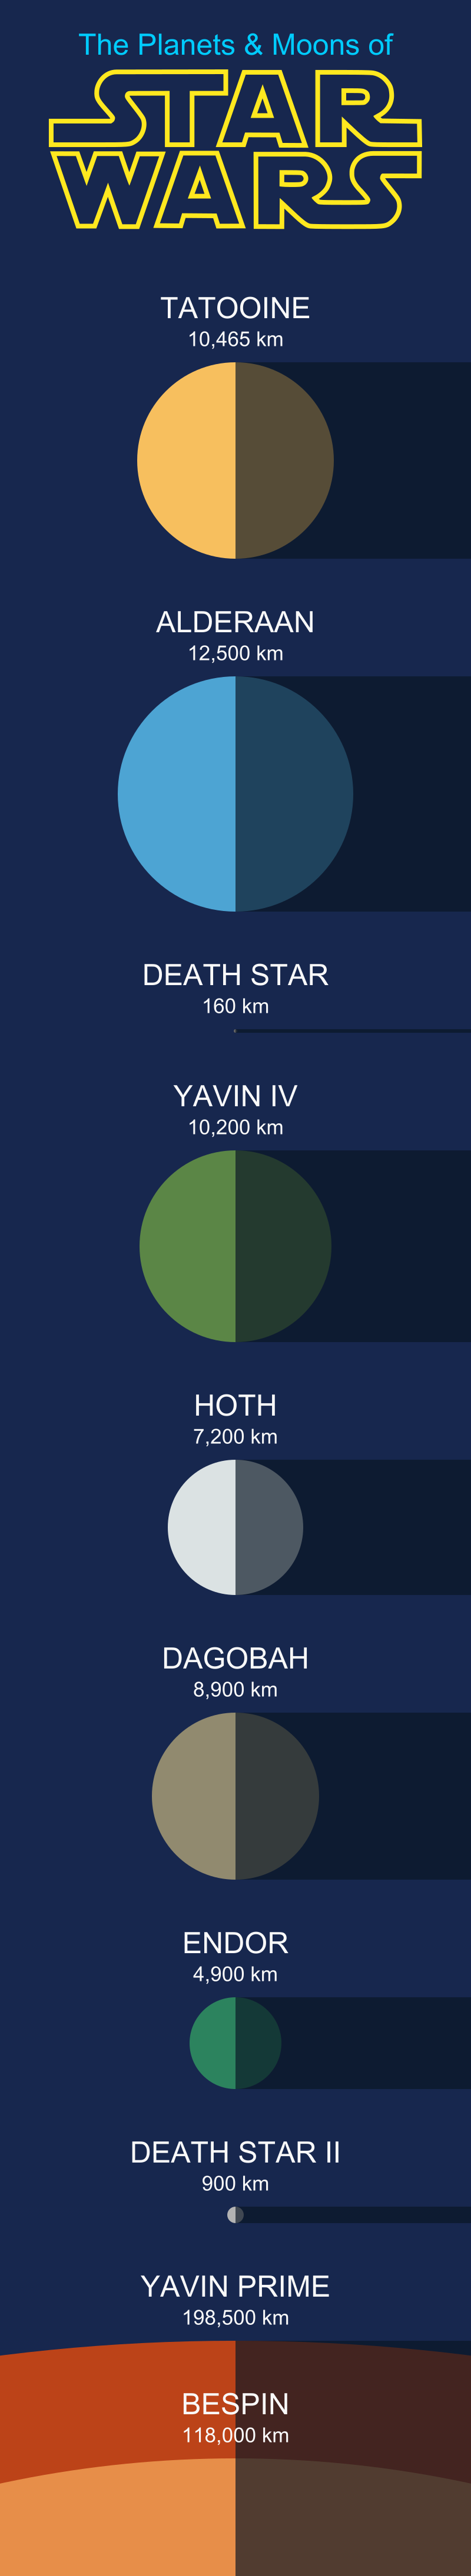 How the Star Wars Planets Stack Up Against Our Own